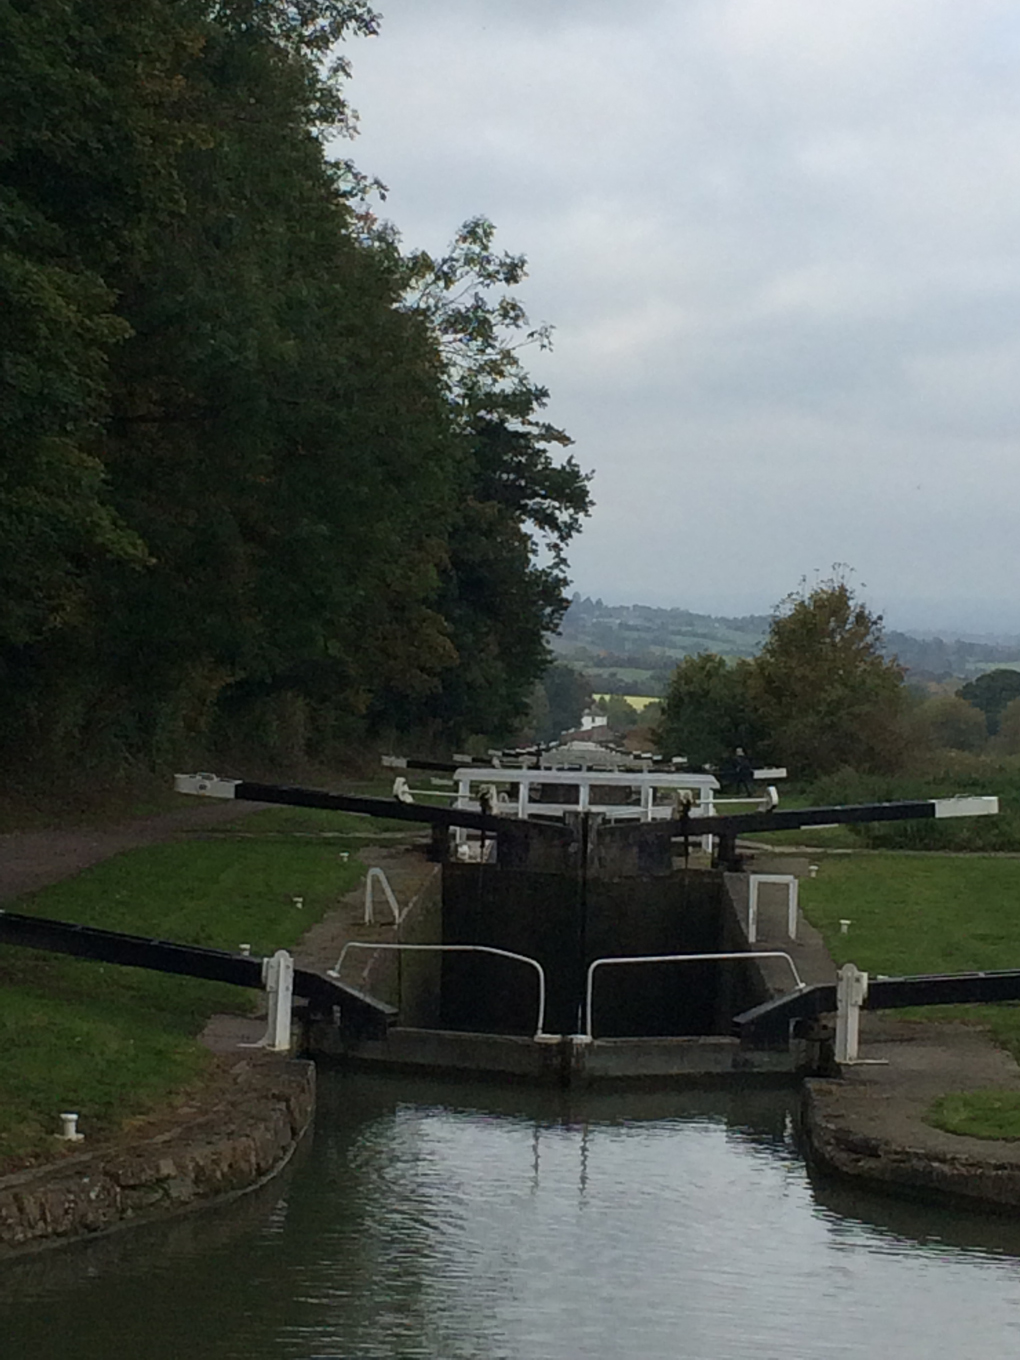 locks on the Kennet and Avon canal